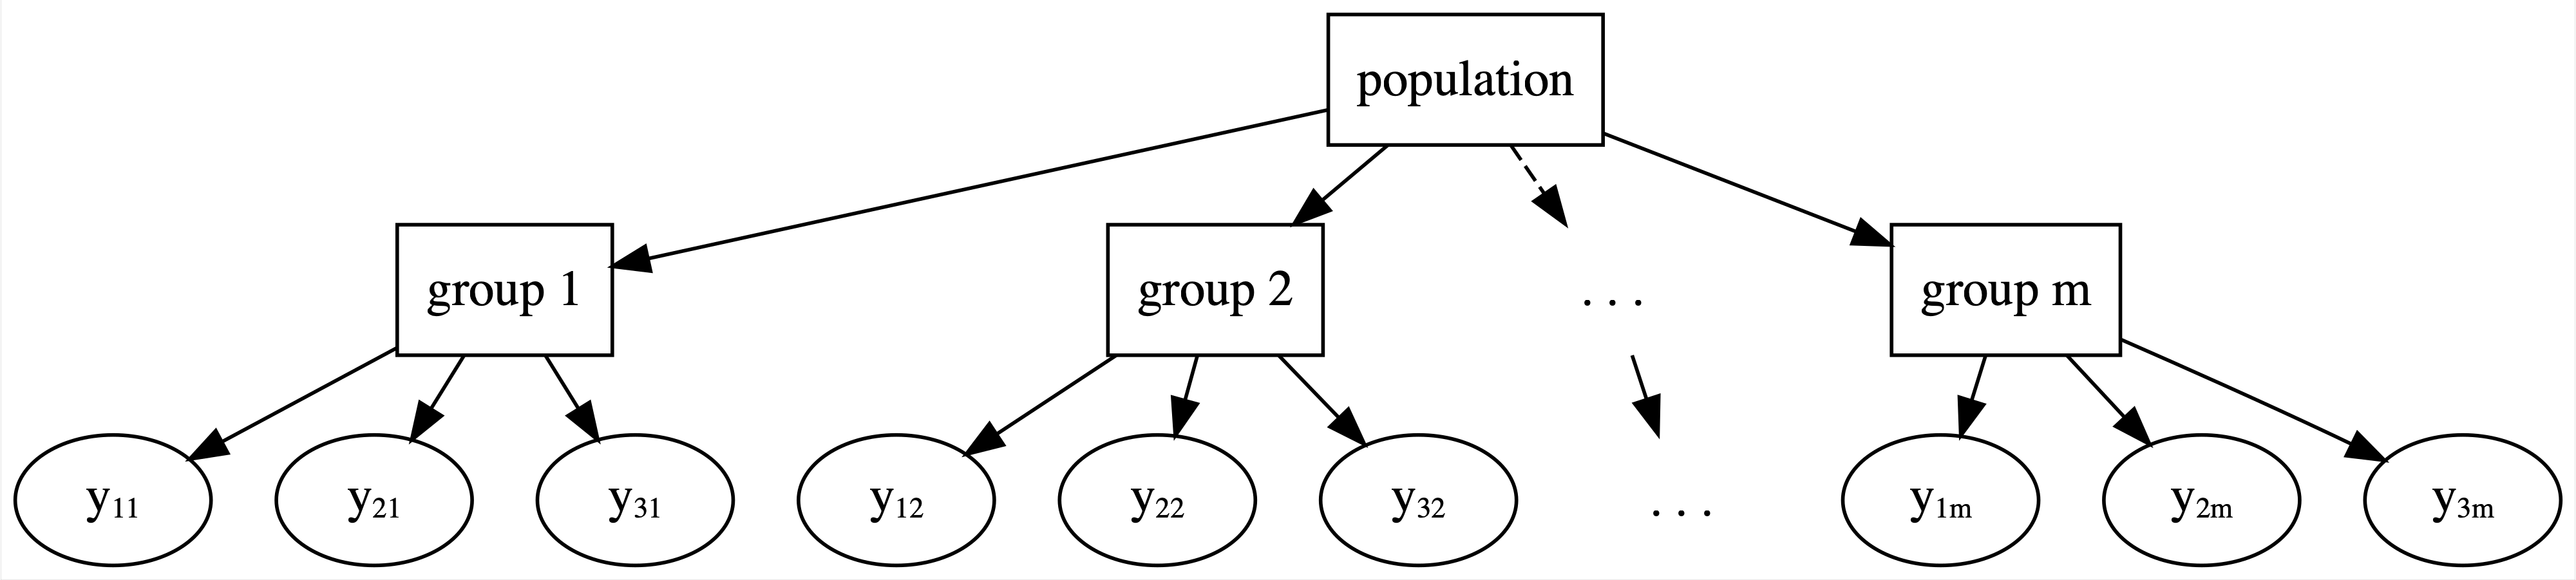 A flow chart. At the top is a box labeled Population. Out of this box are 3 different arrows leading to boxes labeled group 1, group 2, and group m. Out of each of these boxes are 3 different arrows leading to bubbles representing 3 unique data points on each group.